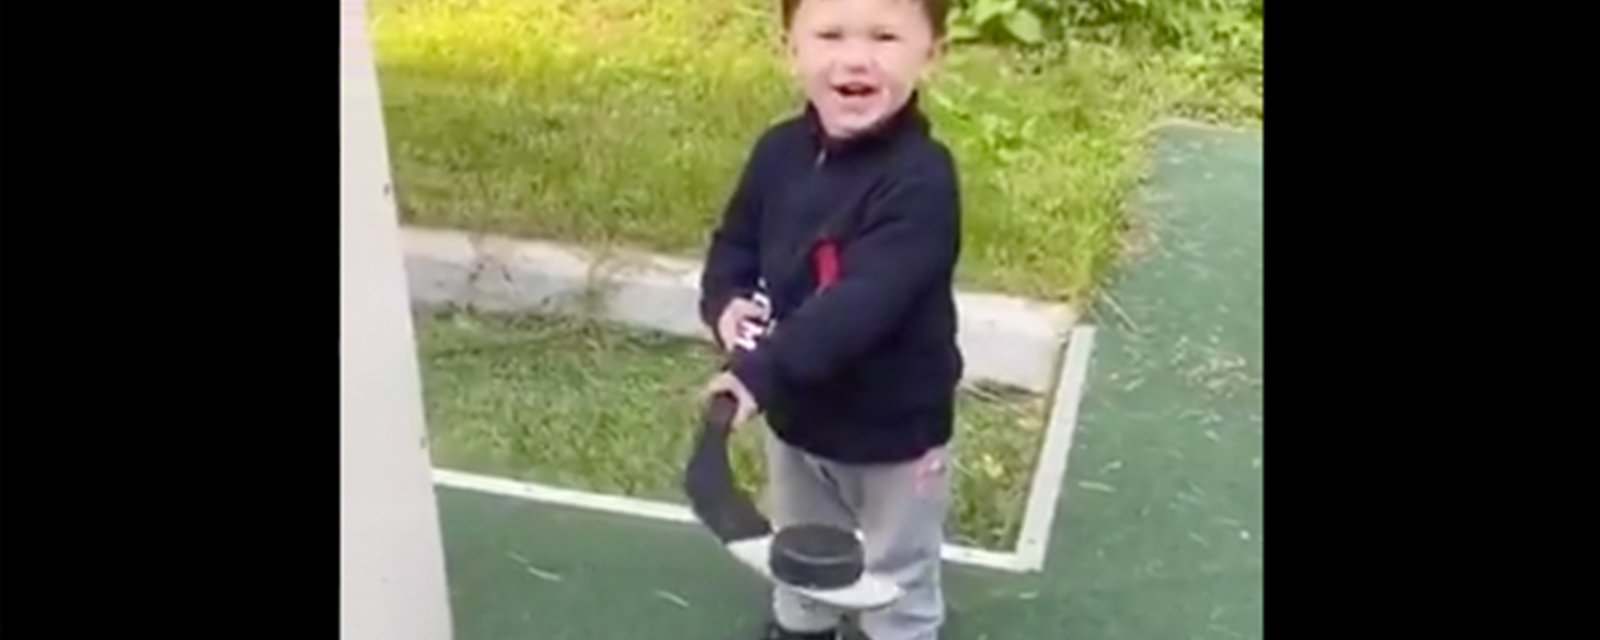 Ovechkin’s 1 year old son goes viral with his crazy puck handling skills